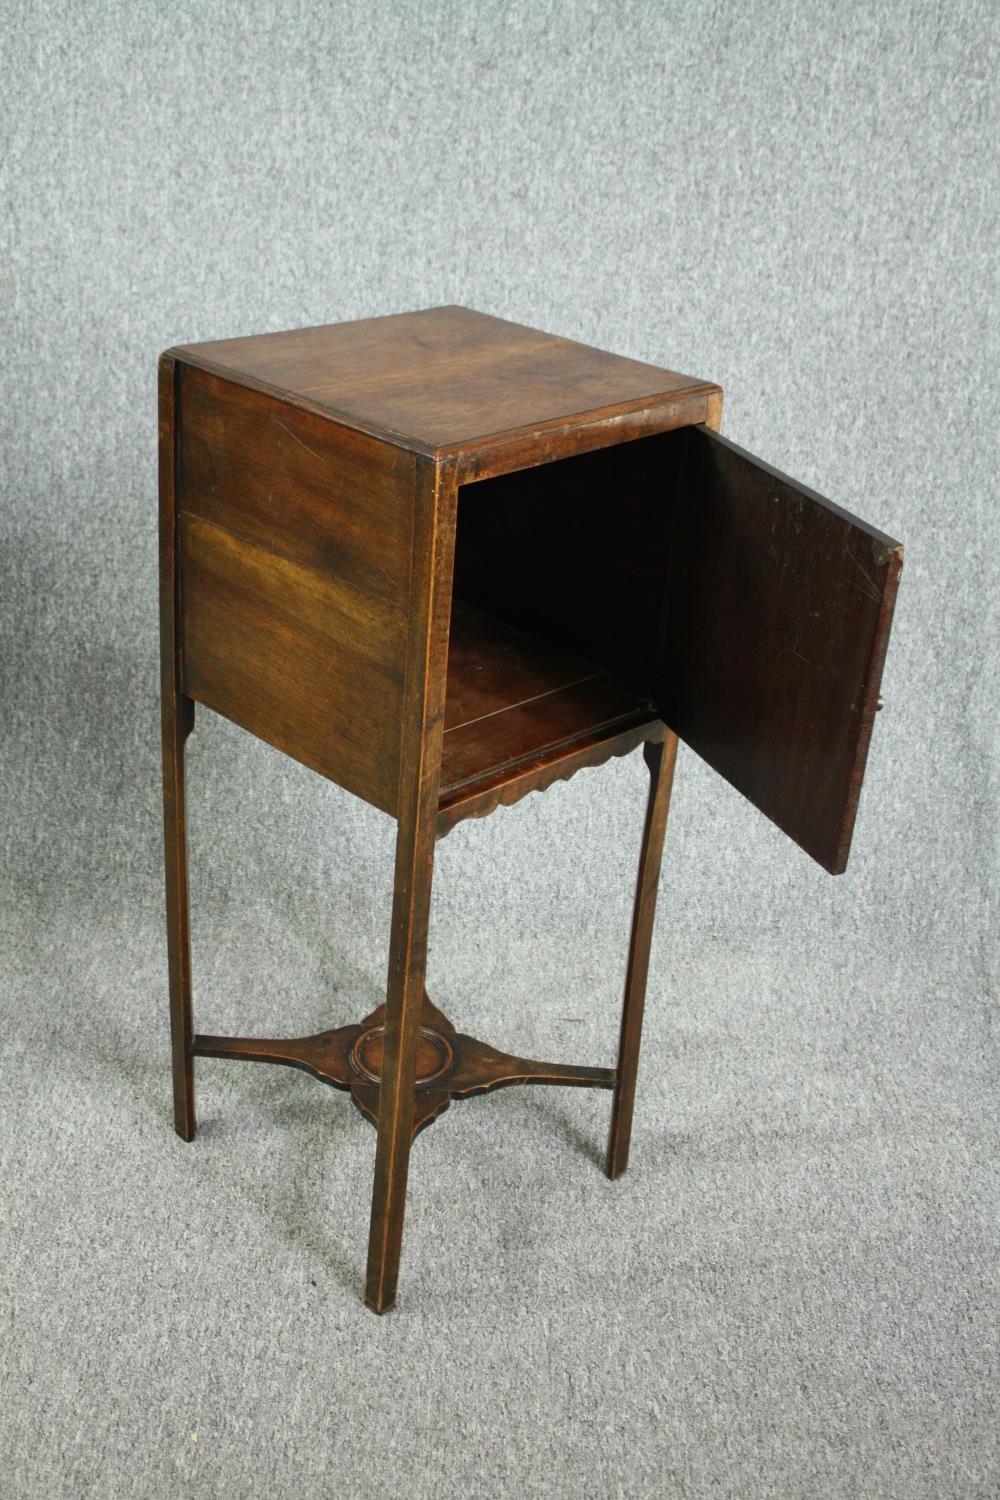 Two similar pot cupboards, 19th century mahogany. H.80 W.32 D.32cm. (each) - Image 4 of 5